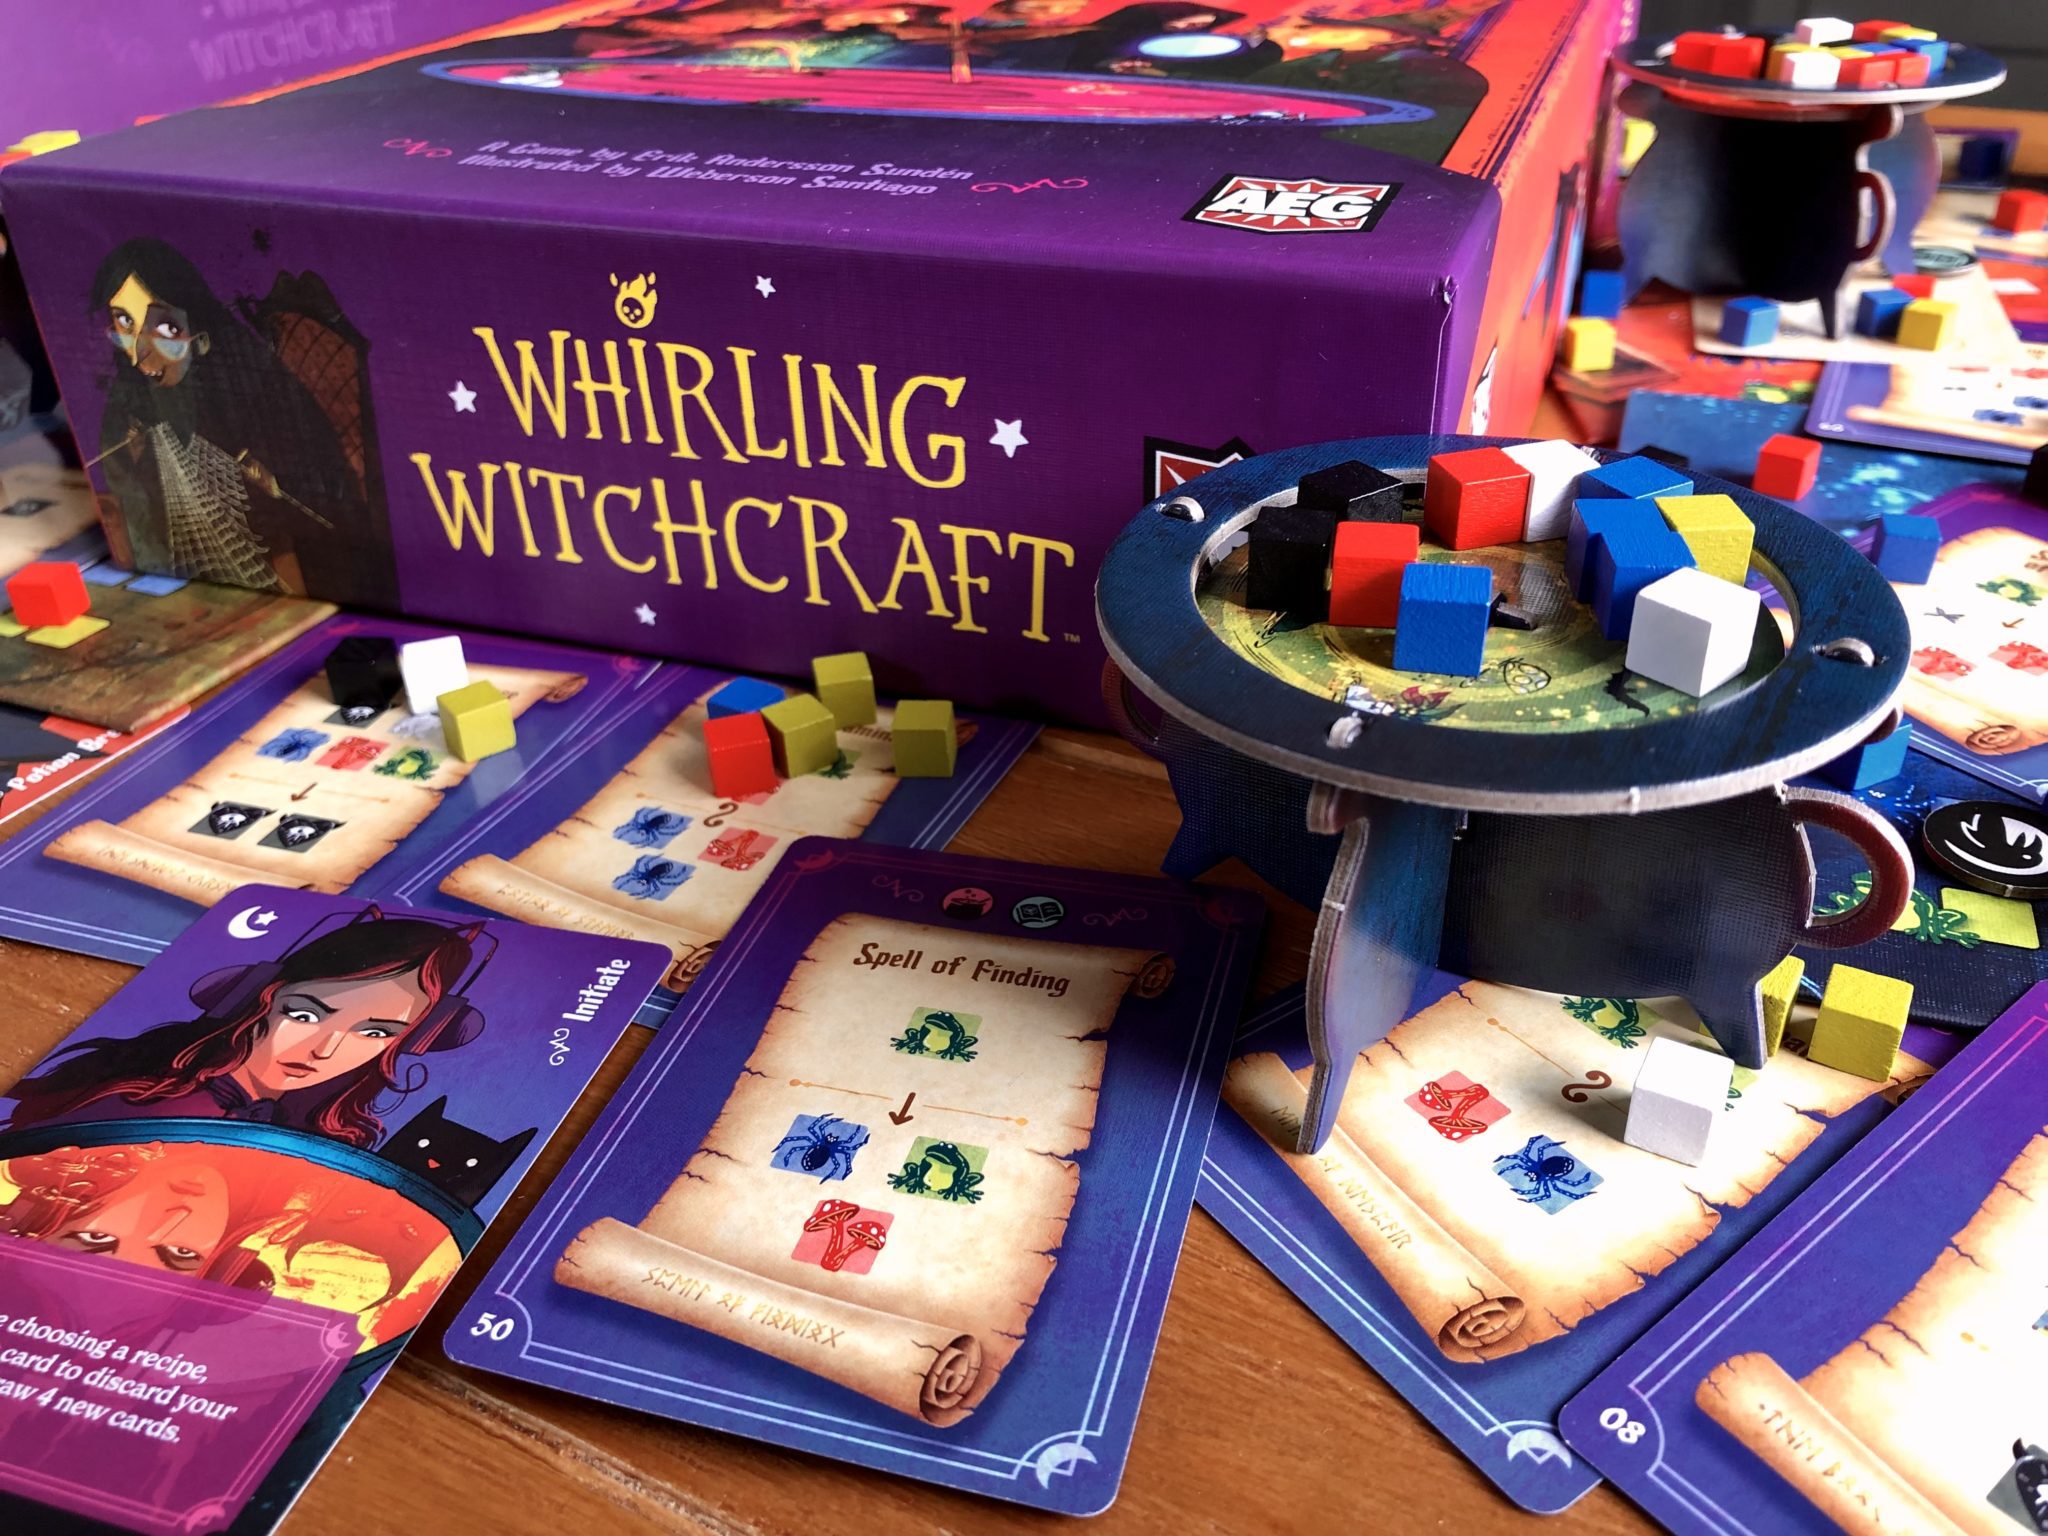 Whirling Witchcraft with components